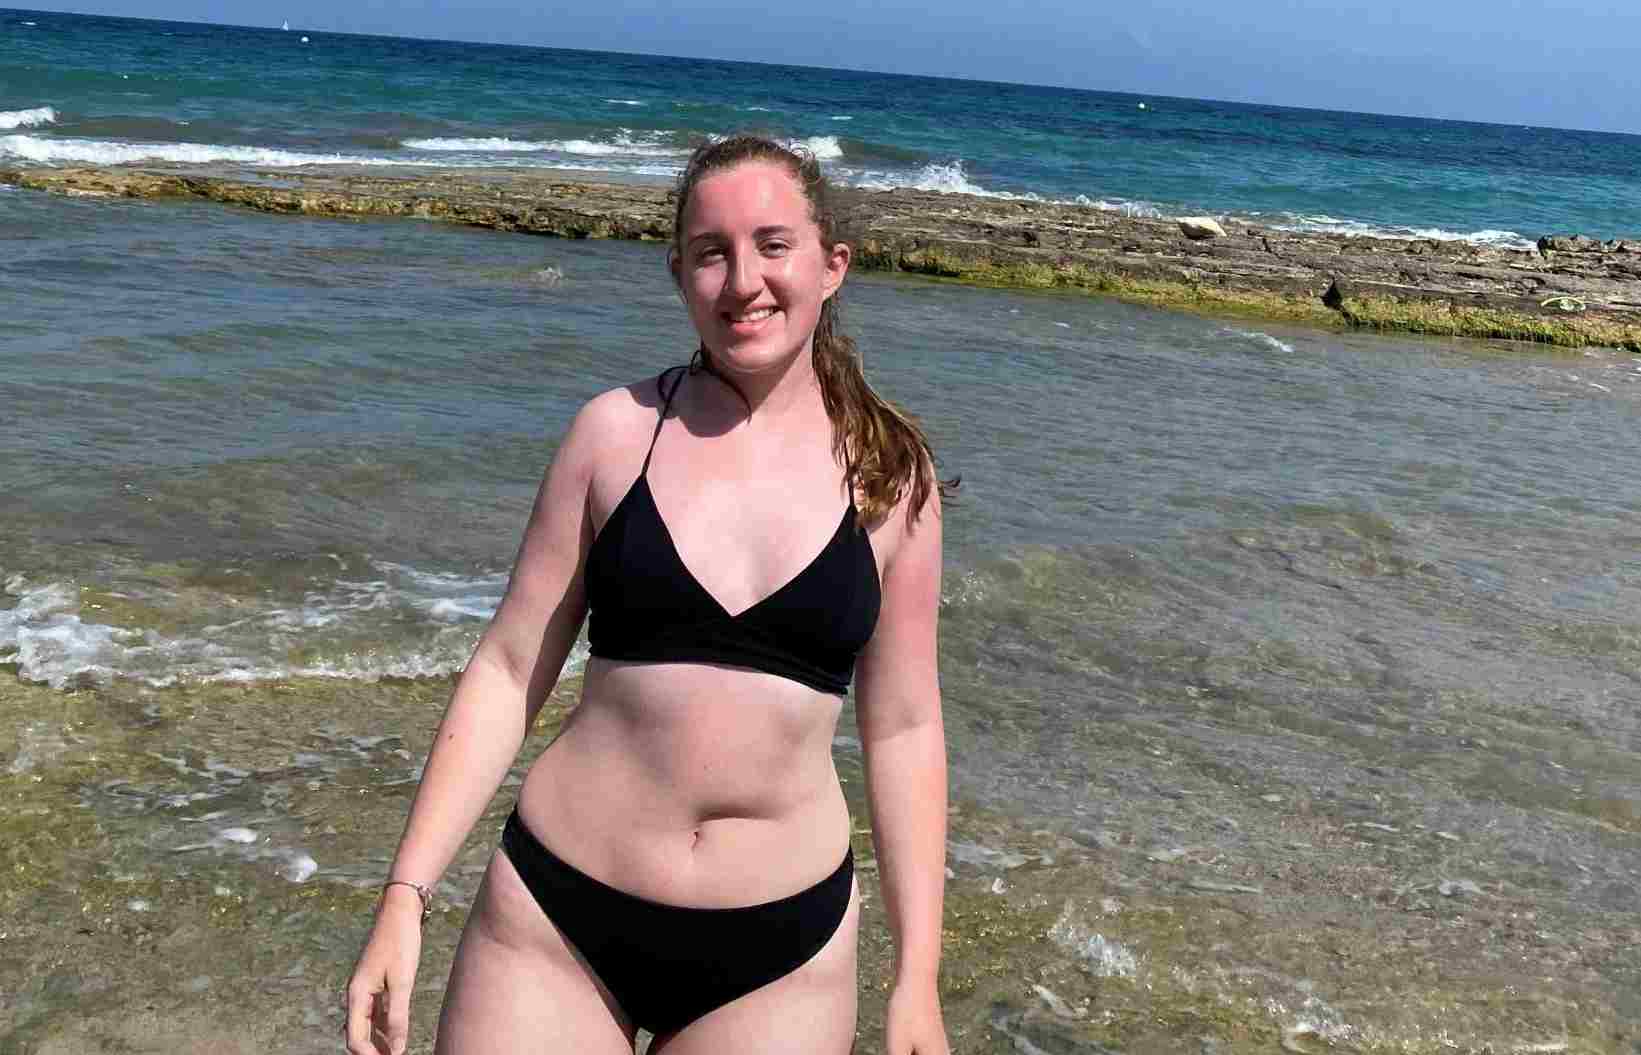 A young woman in a black bikini with a scar near her belly button